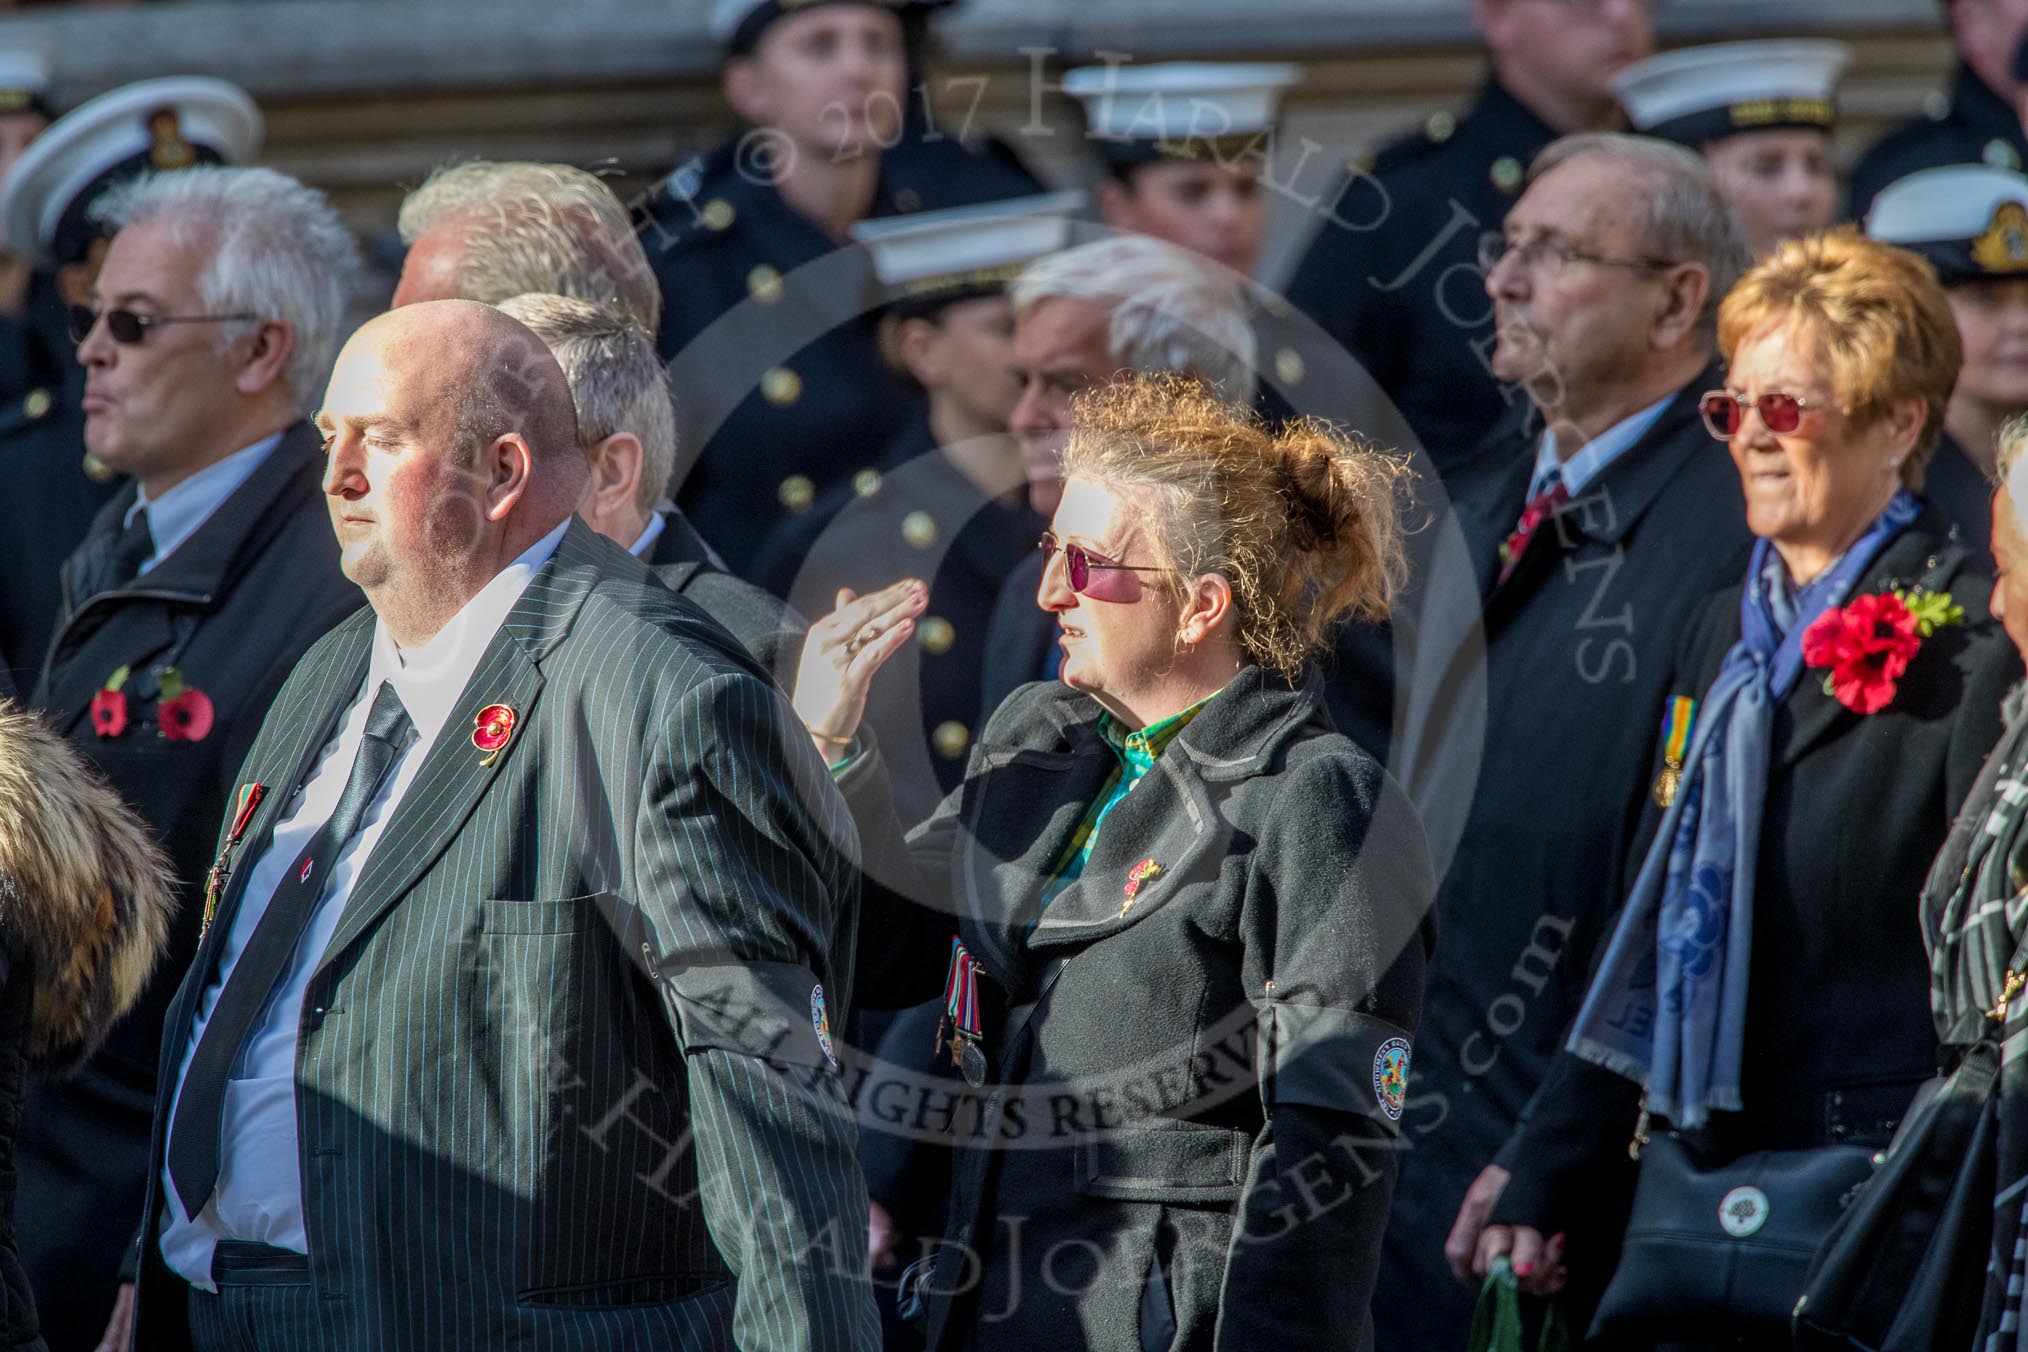 The Showmen's Guild of Great Britain (Group M18, 26 members) during the Royal British Legion March Past on Remembrance Sunday at the Cenotaph, Whitehall, Westminster, London, 11 November 2018, 12:27.